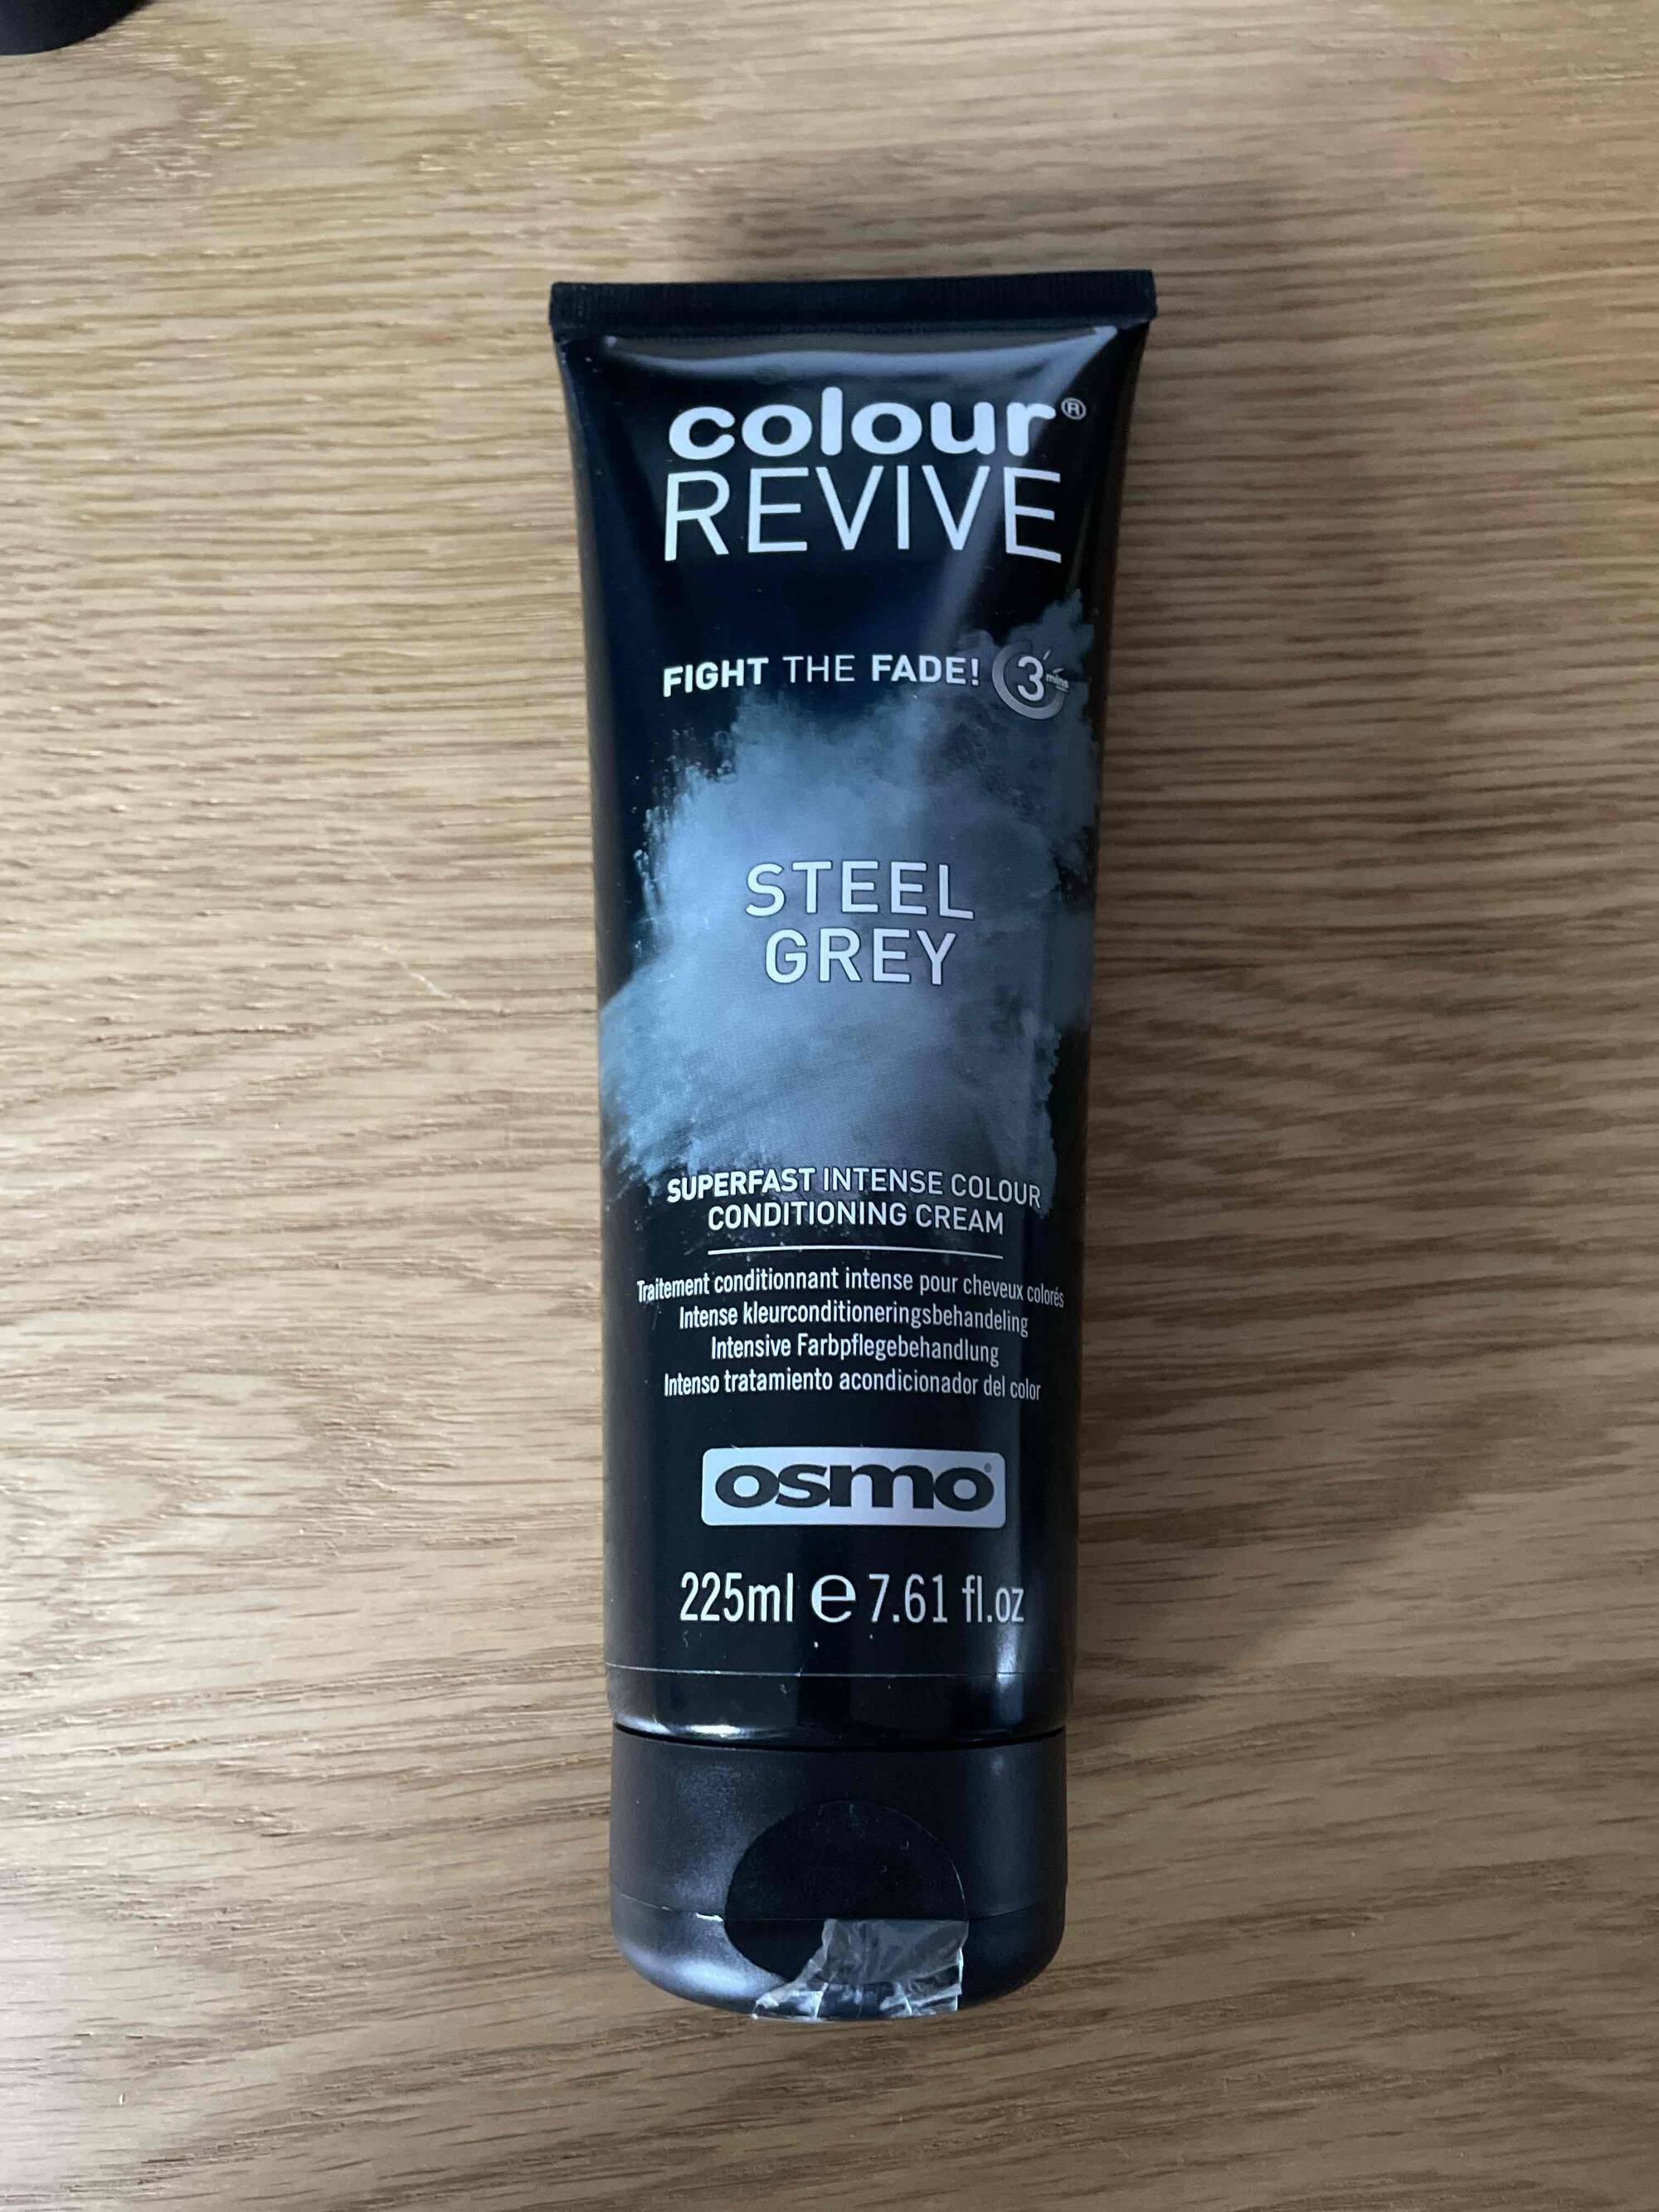 OSMO - Colour revive steel grey - Conditioning cream